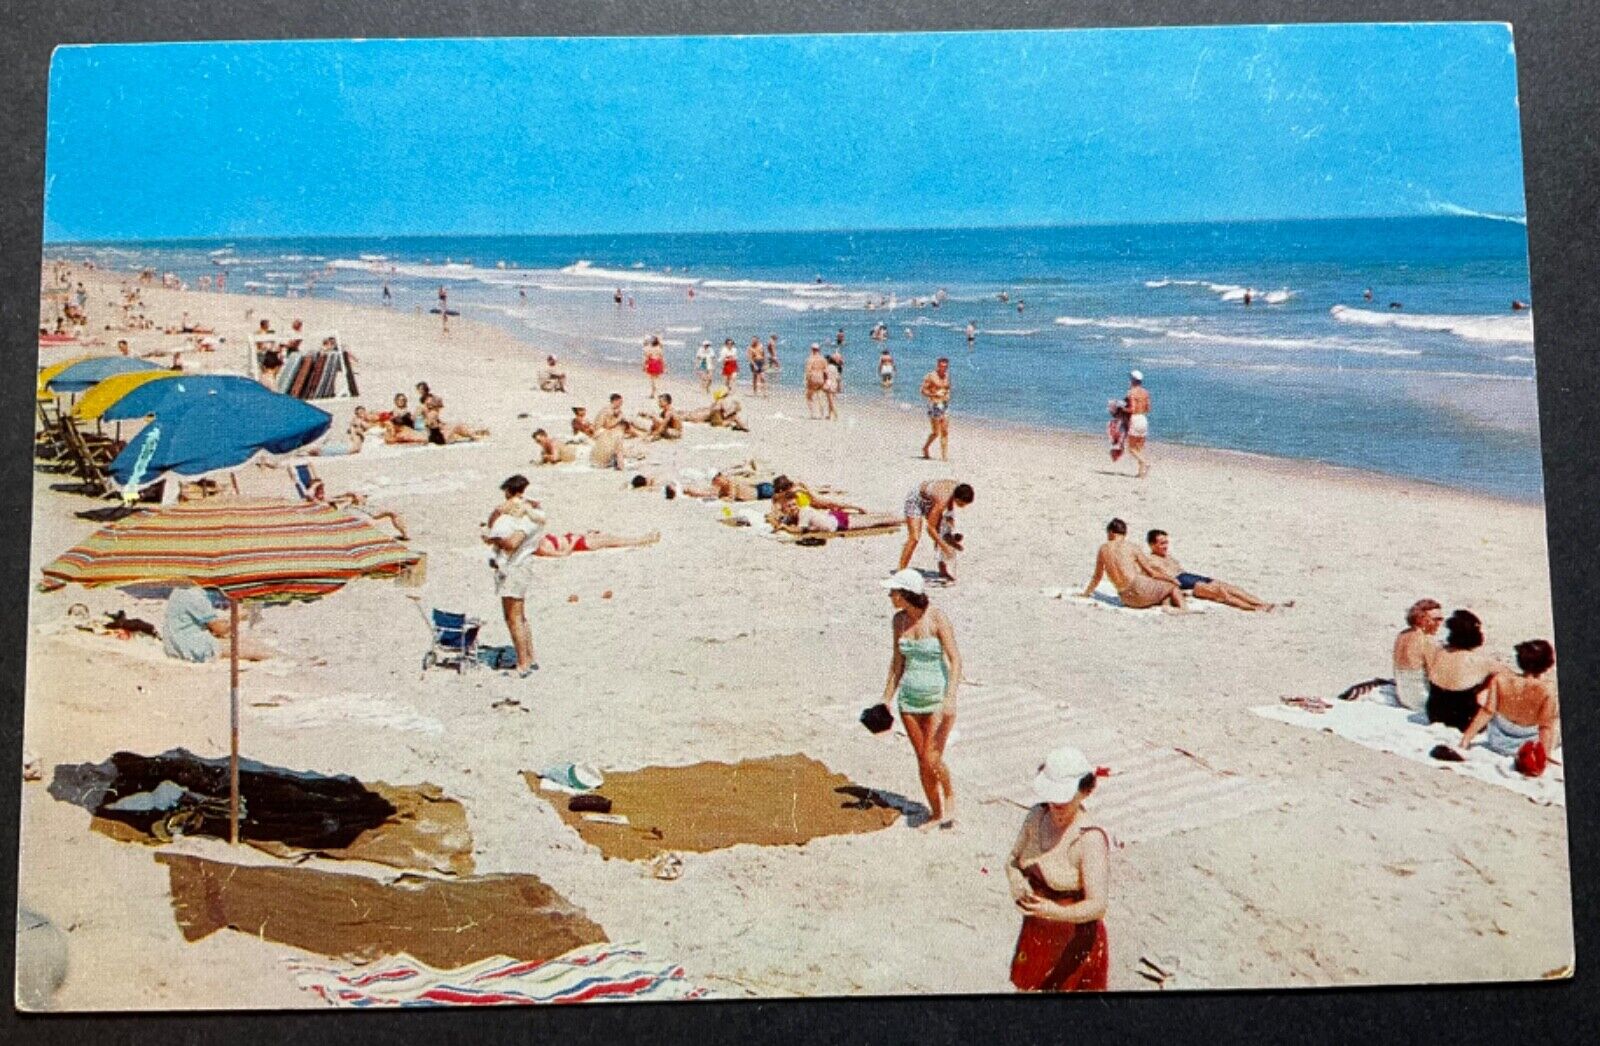 Padre Island Texas TX Postcard one of the finest resorts beaches in the nation